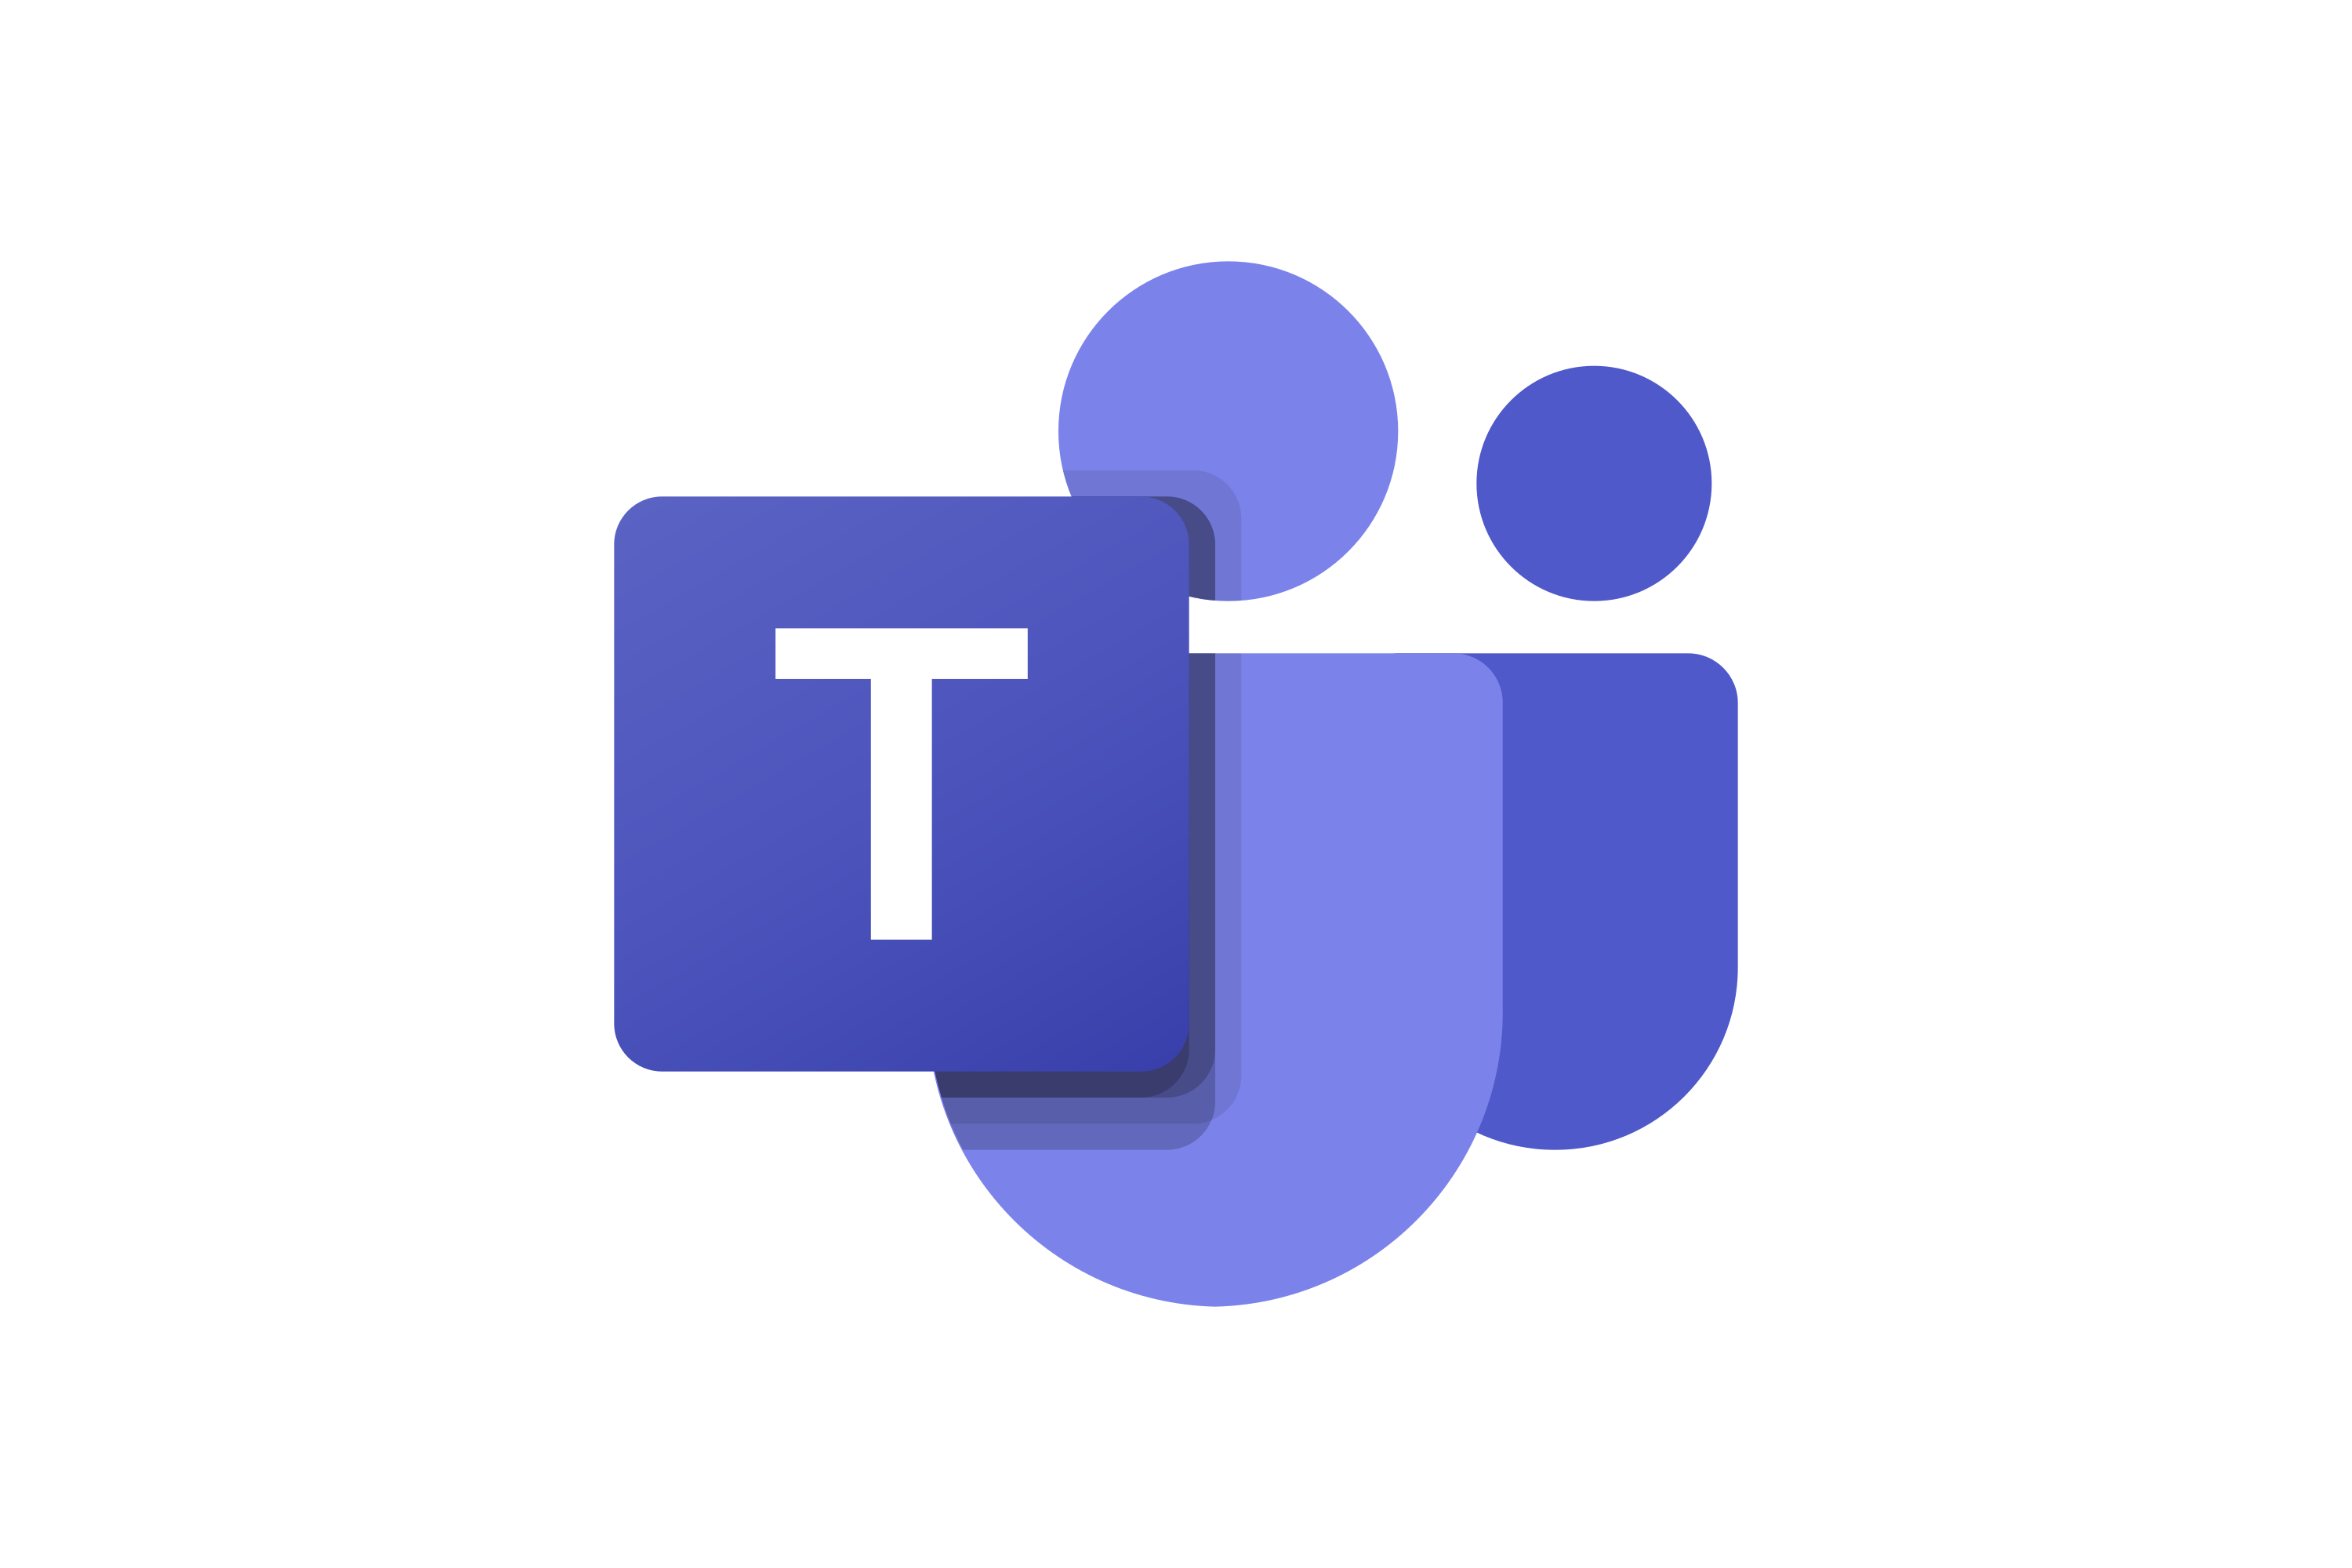 Microsoft Teams logo. Microsoft Teams is a proprietary business communication platform developed by Microsoft, as part of the Microsoft 365 family of products. Teams primarily competes with the similar service Slack, offering workspace chat and videoconferencing, file storage, and application integration. 